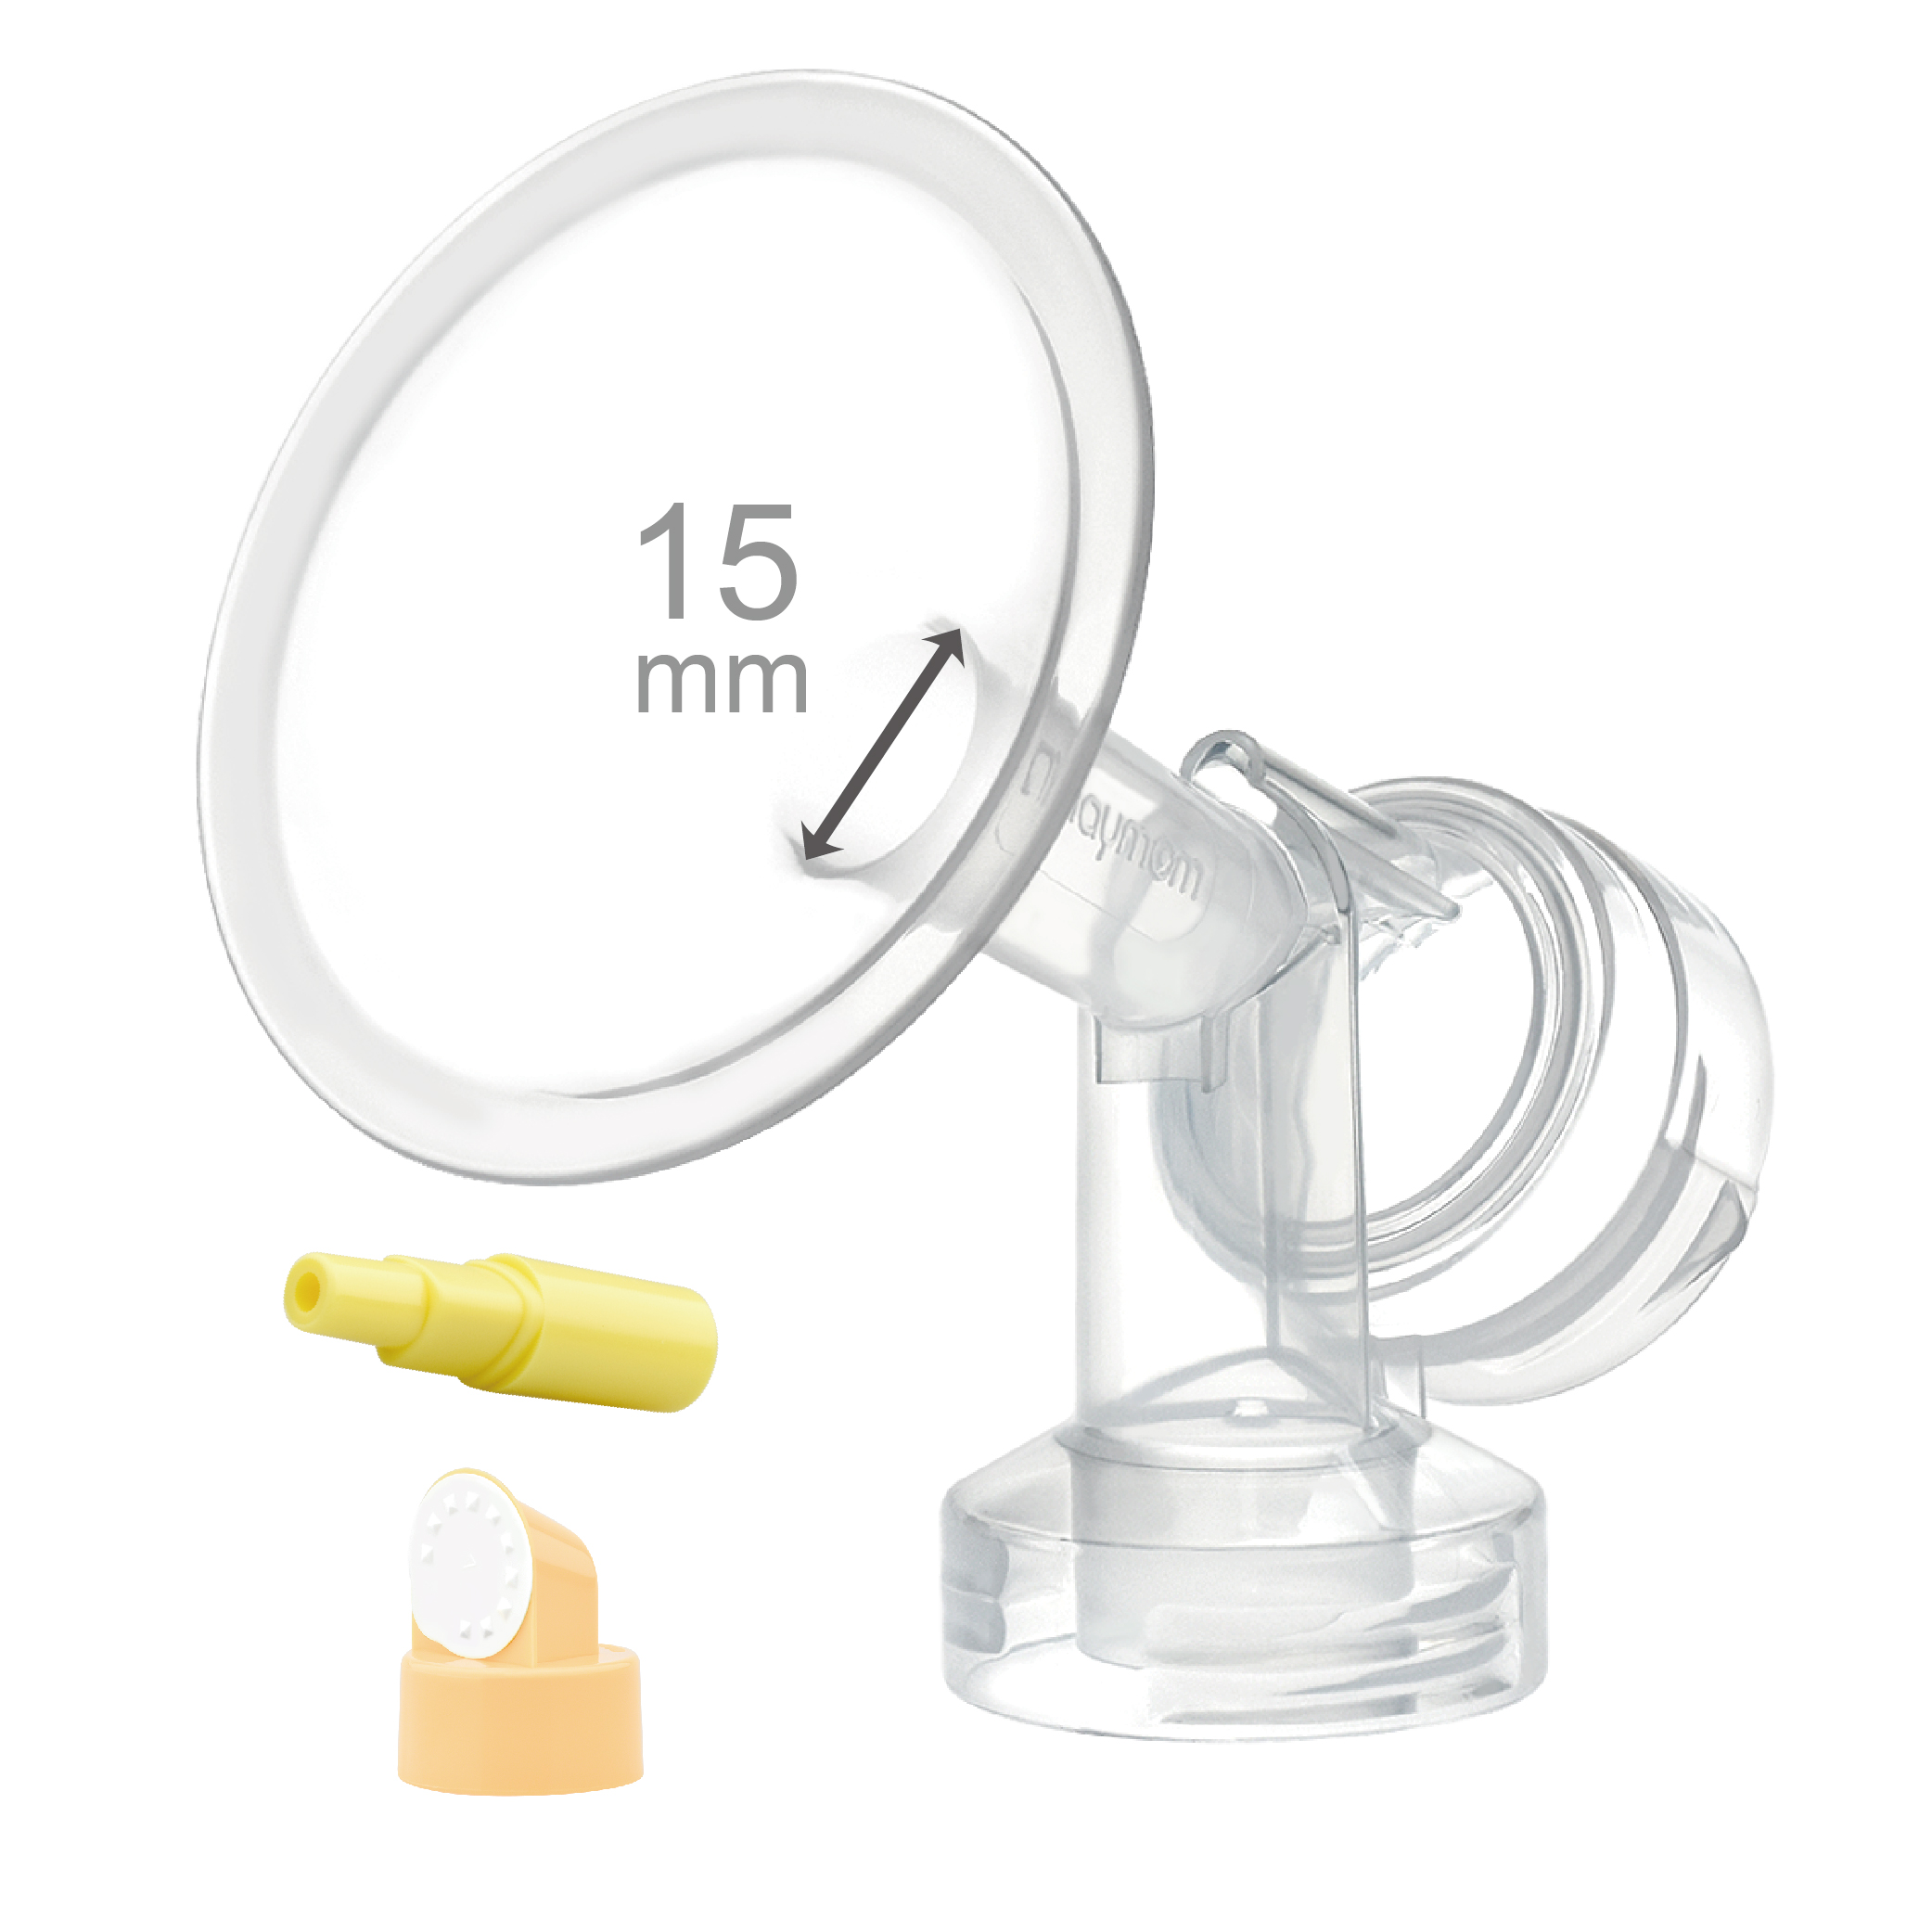 (image for) 15 mm Extra Small Flange w/ Valve and Membrane for SpeCtra Breast Pumps S1, S2, M1, Spectra 9; Narrow (Standard) Bottle Neck; 1 pc